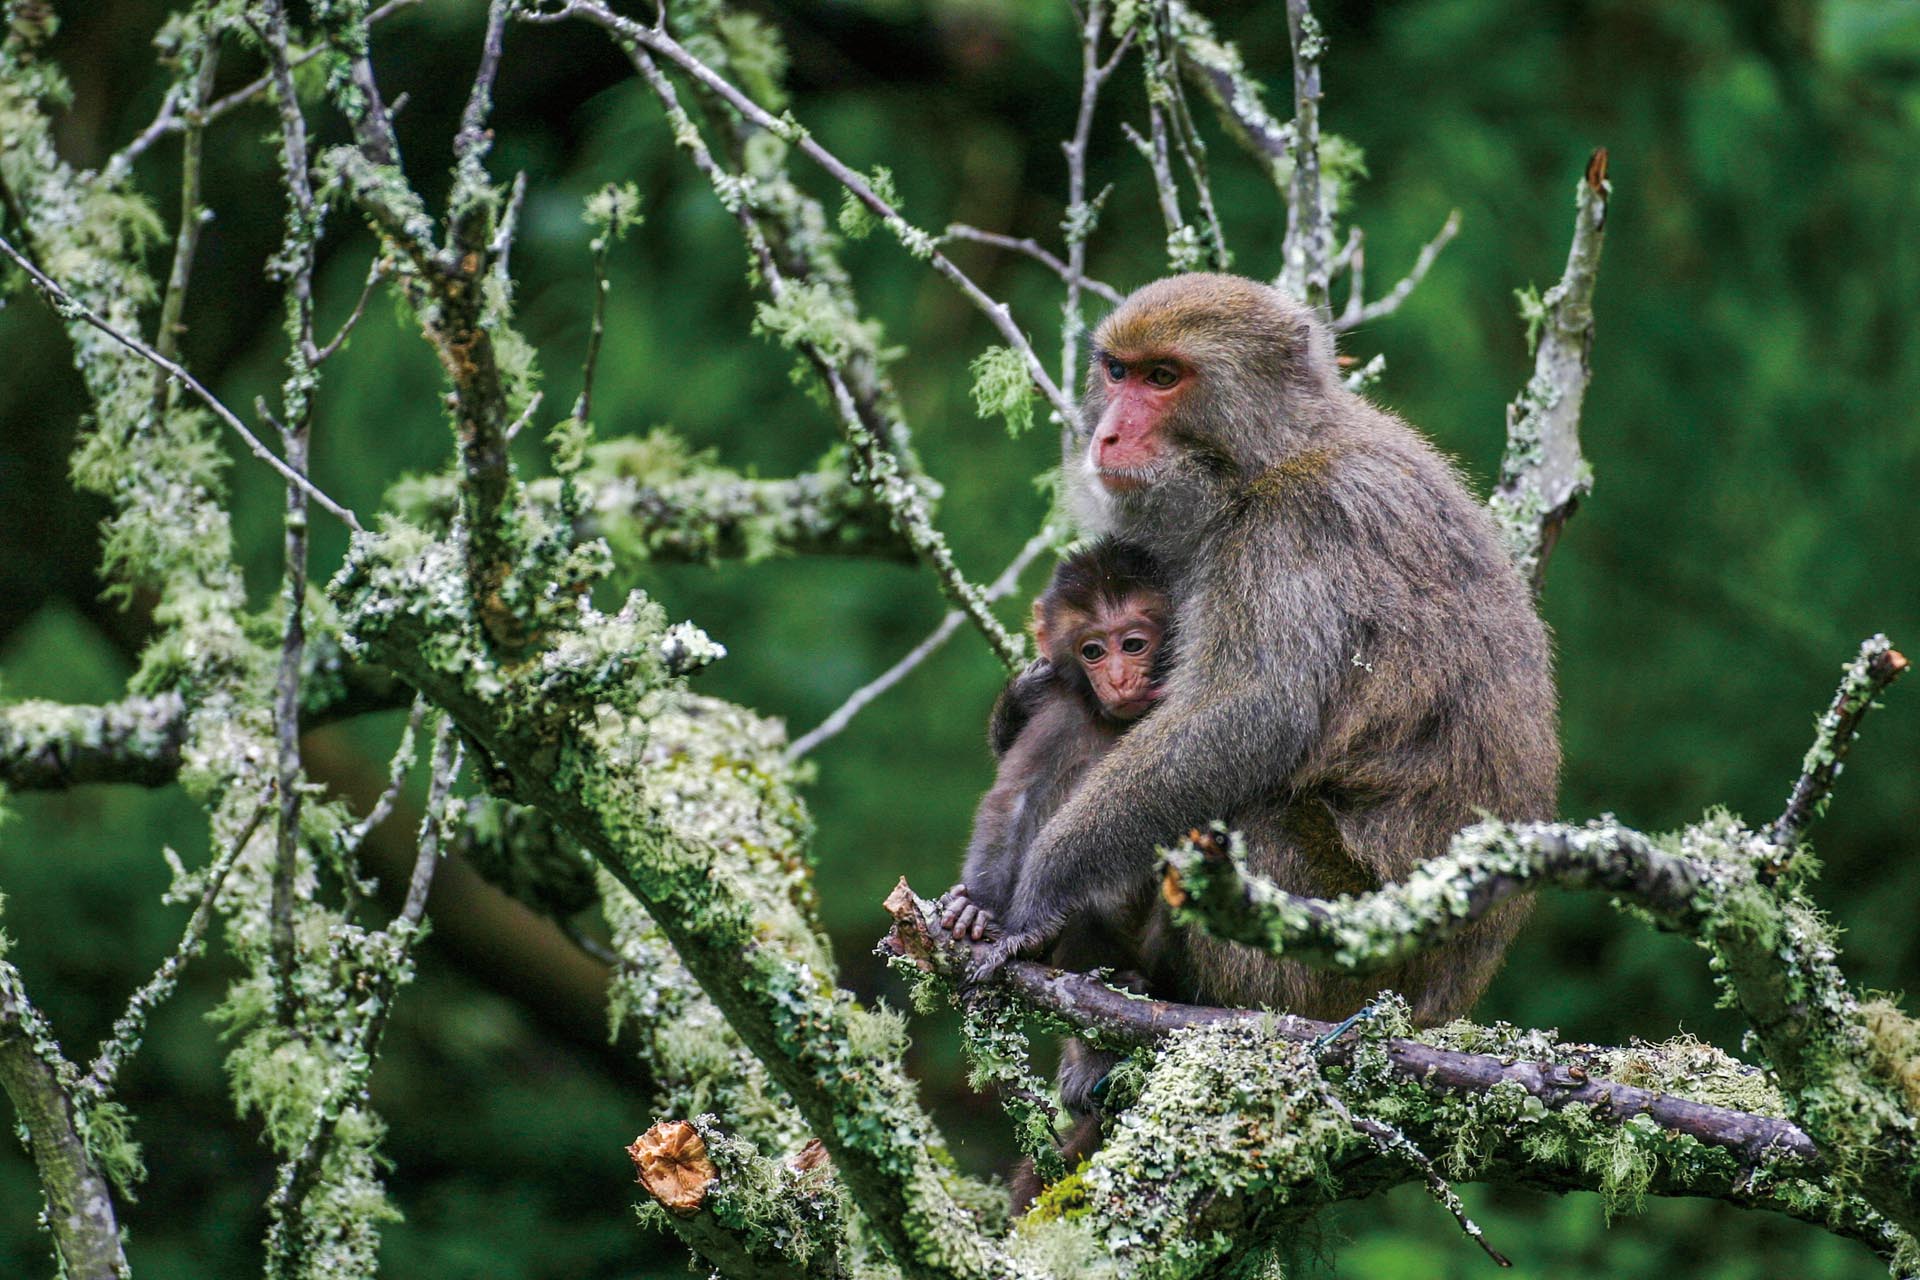 Formosan Rock-Monkey, endemic to Taiwan, is a protected species.